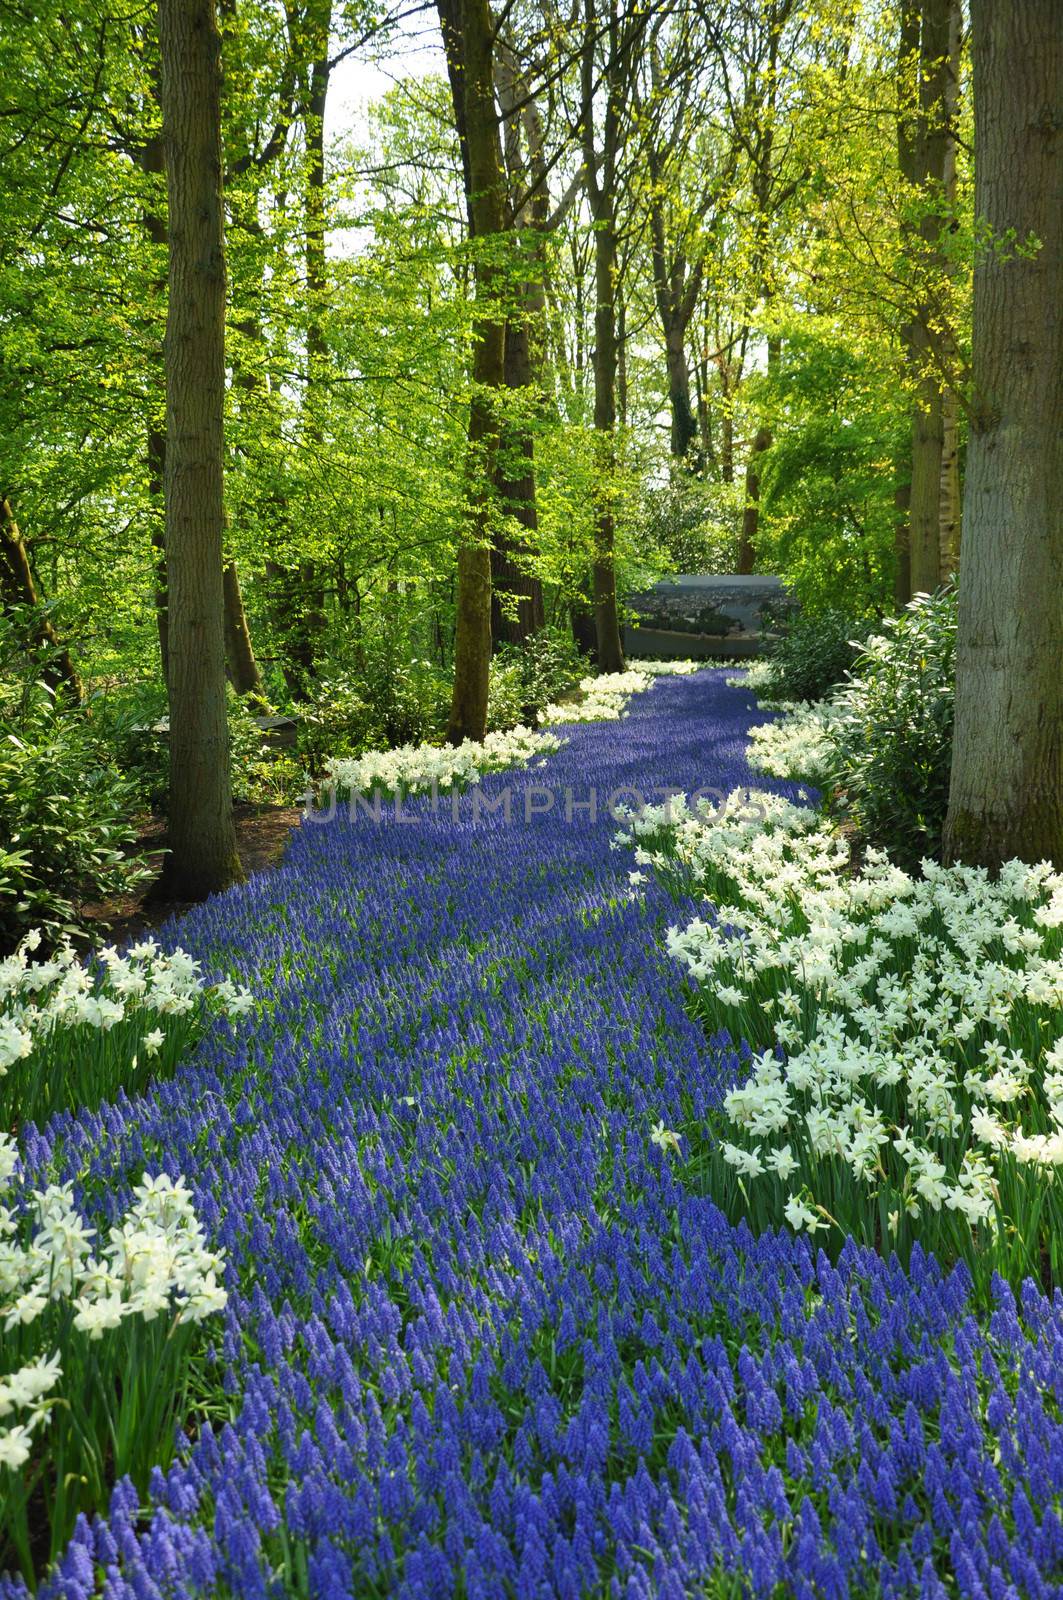 Grape Hyacinth and white daffodils in Keukenhof park in Holland by Eagle2308